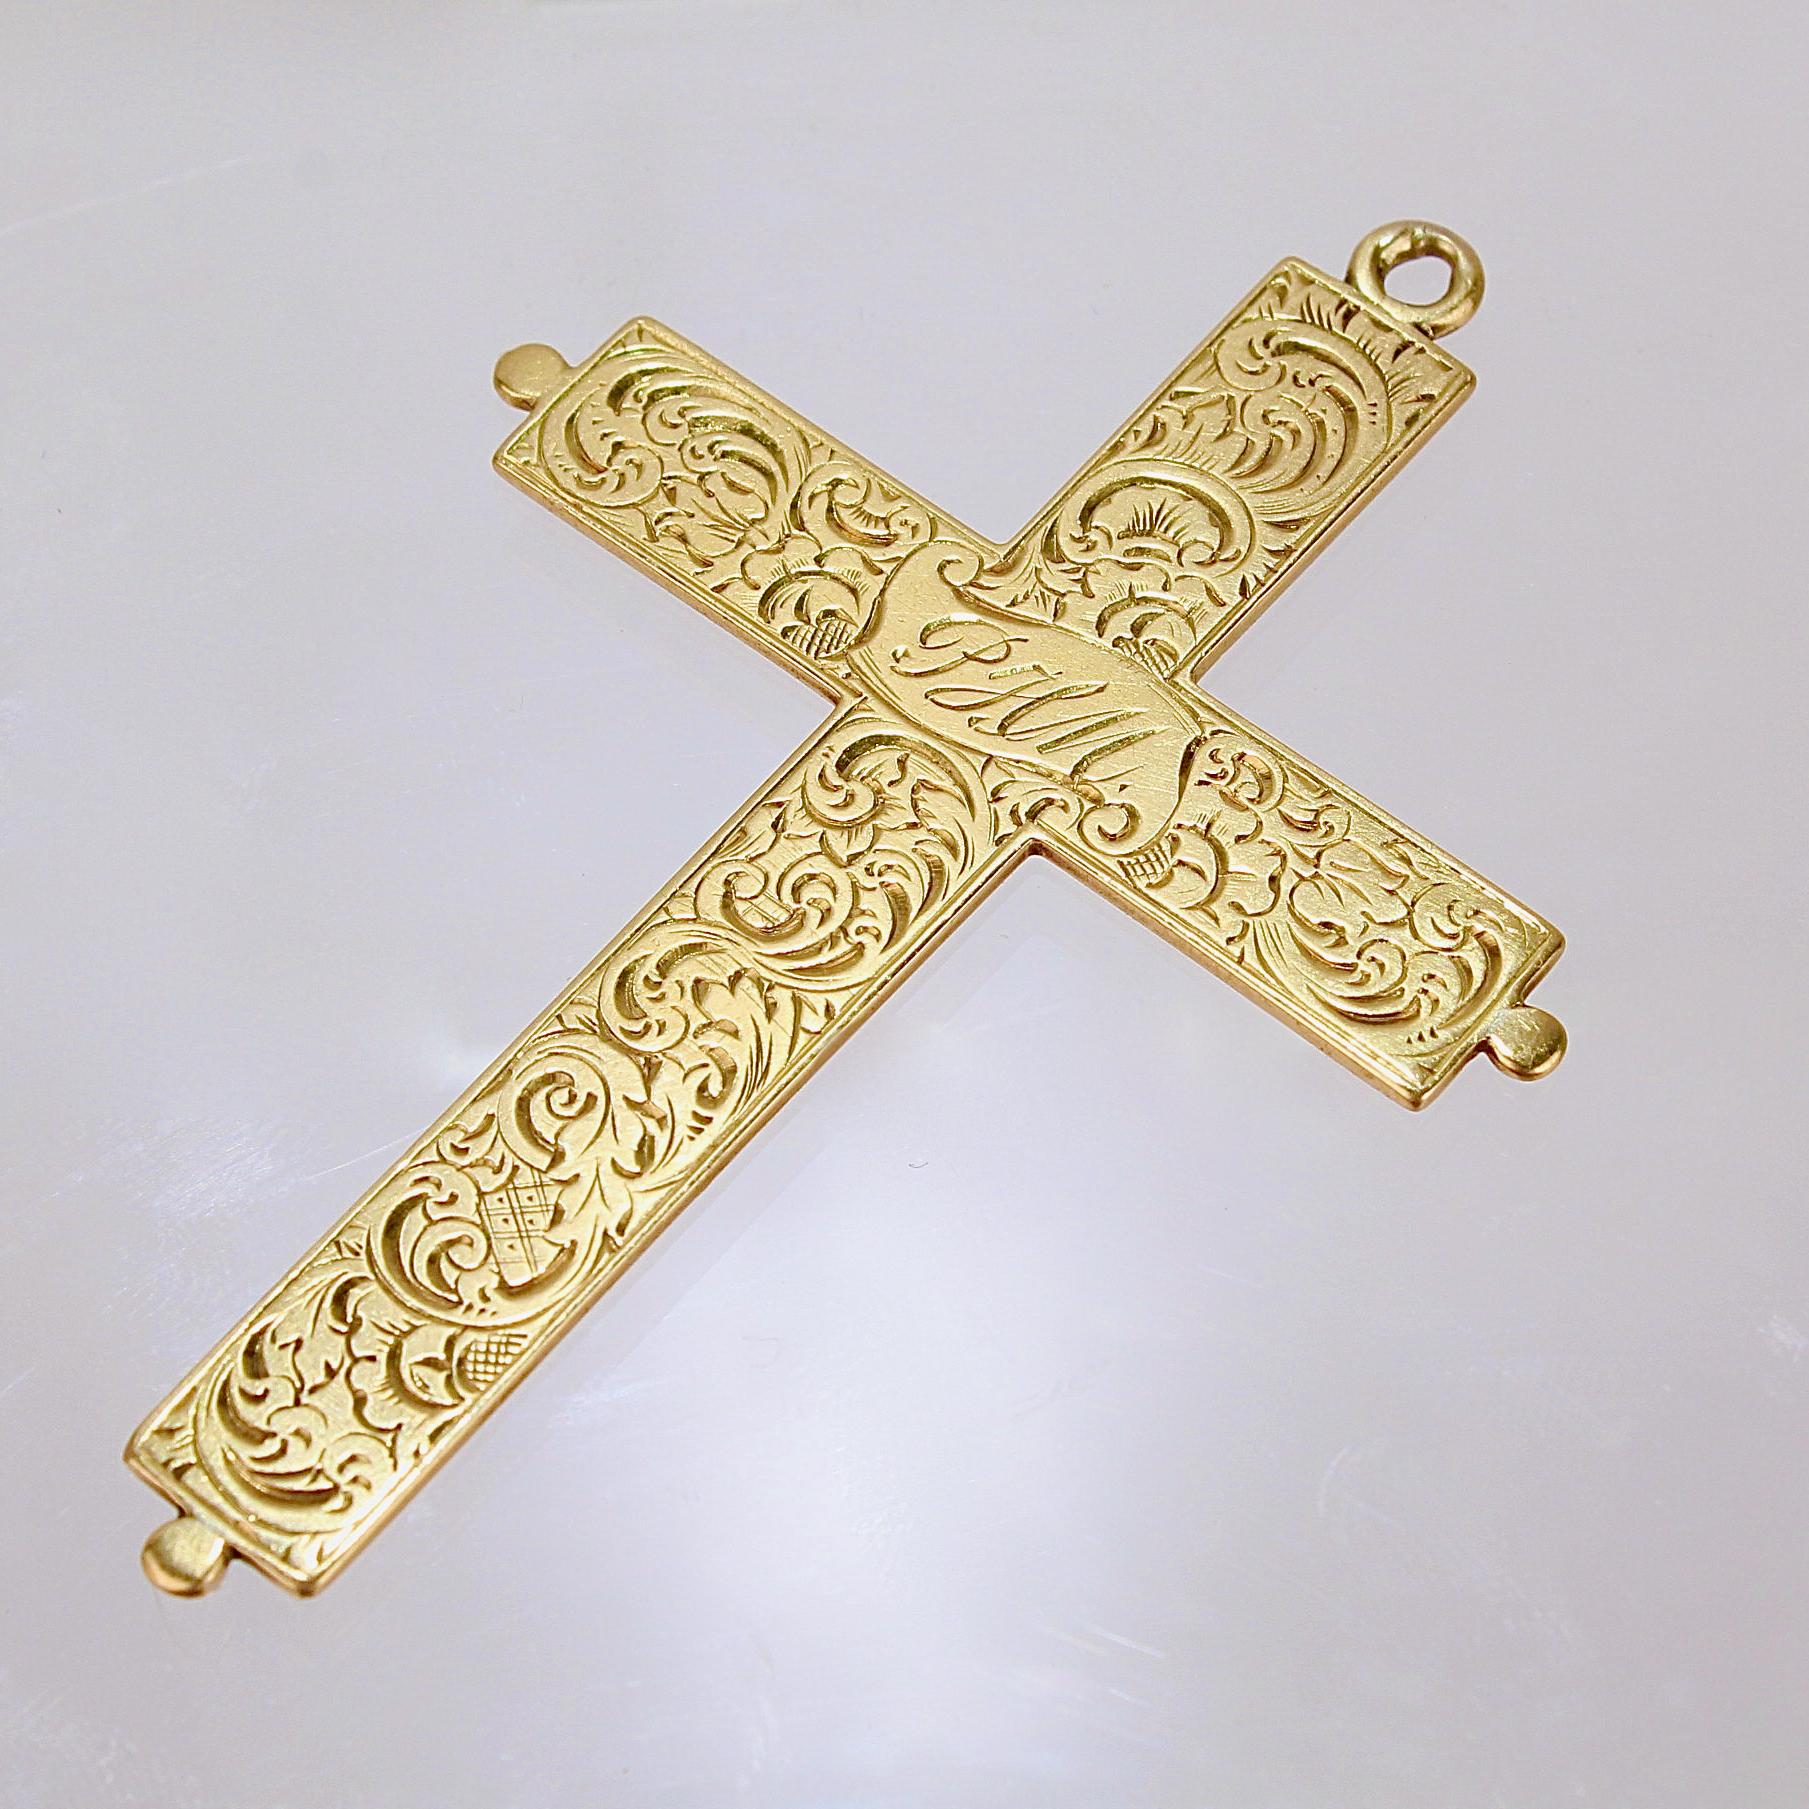 A very fine antique crucifix or pendant cross.

In 14k yellow gold and decoratively engraved to both the front and back. 

The center of each side of the pendant is engraved with initials (PHM and EJM).

Date:
20th century

Overall Condition:
It is